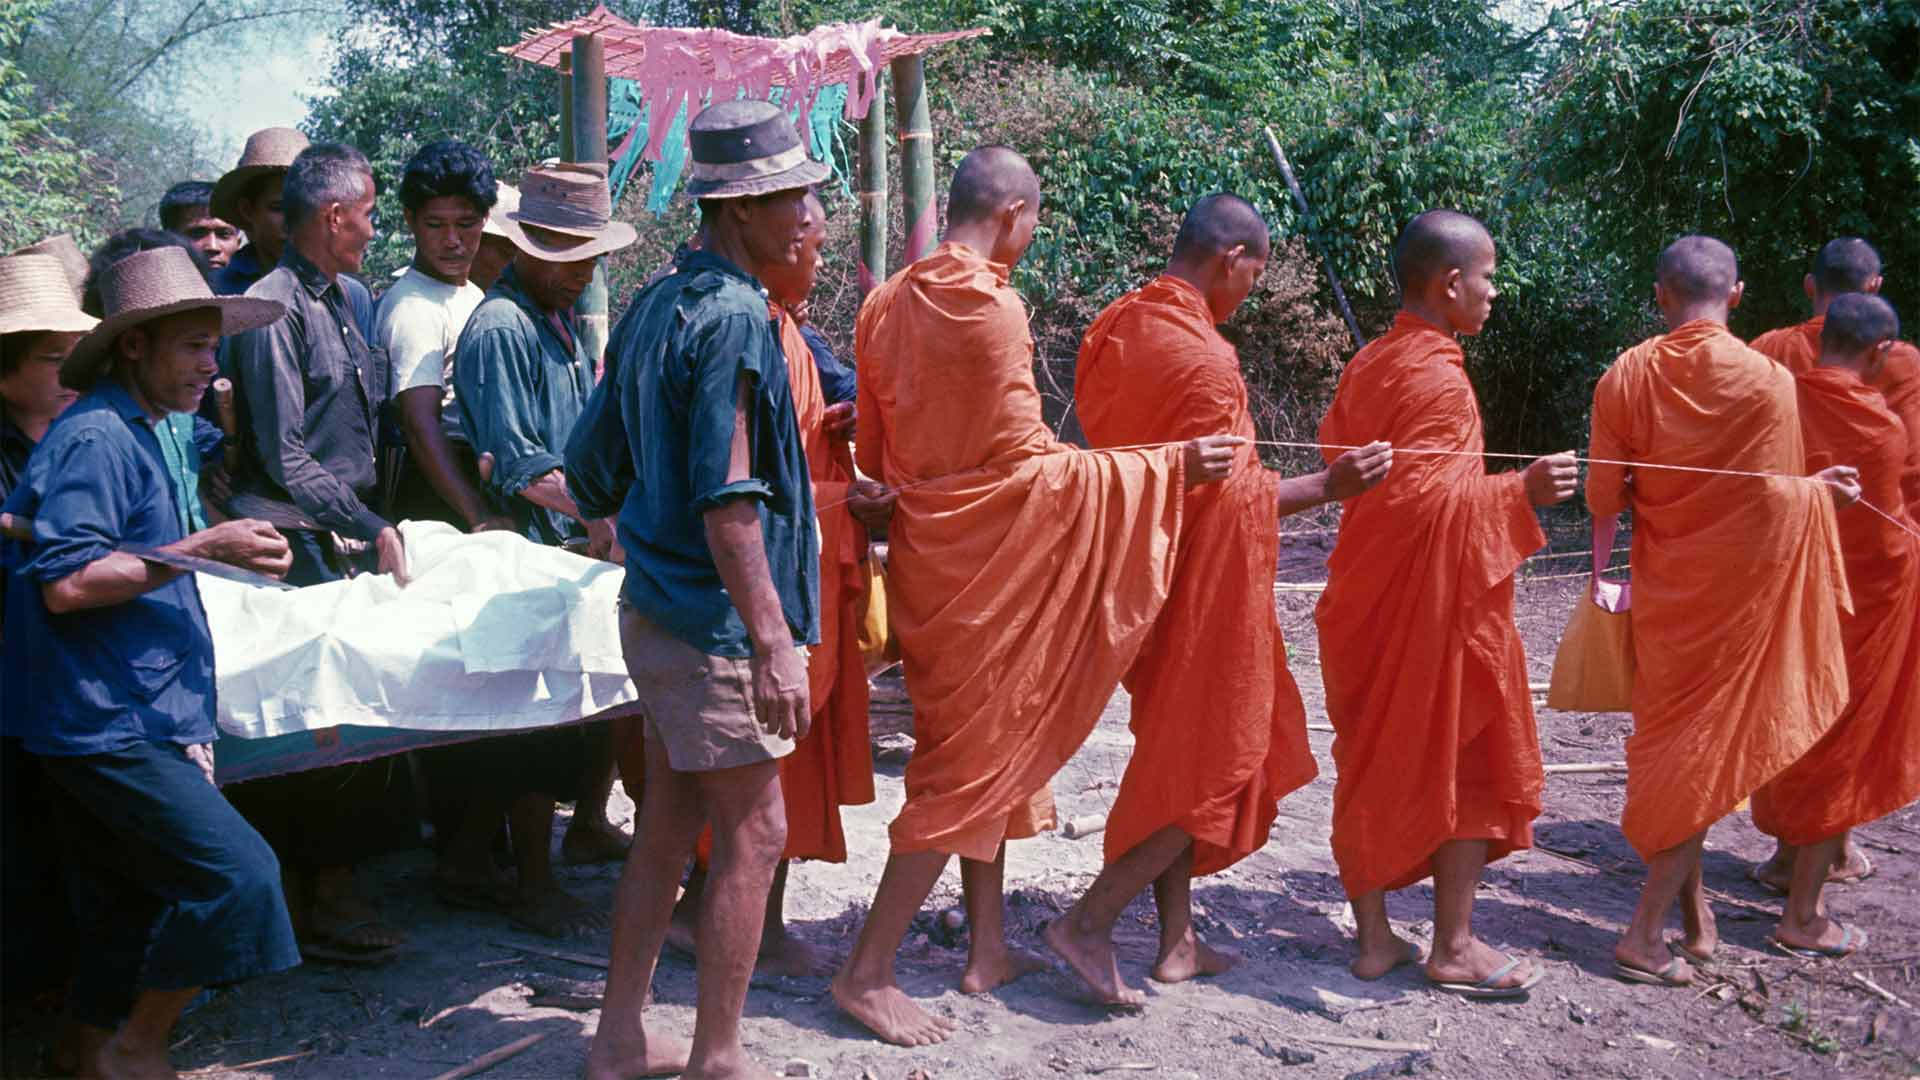 on left side villagers surround coffin draped in white cloth, to the right procession of monks holding string move outward